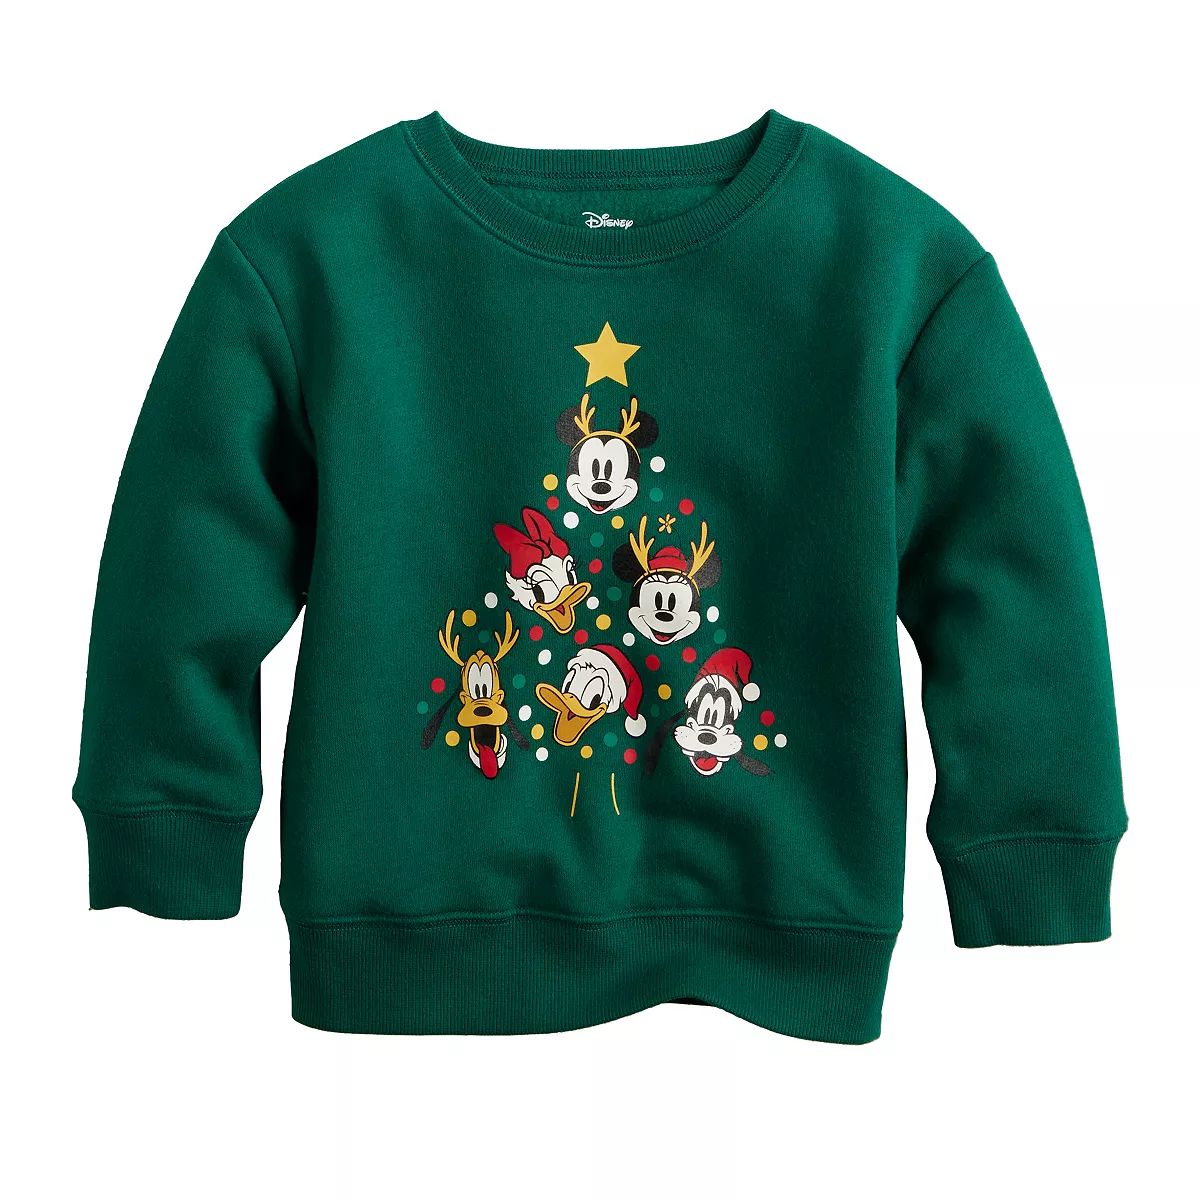 Disney's Mickey Mouse and Friends Baby & Toddler Boy Holiday Crewneck Sweatshirt by Jumping Beans... | Kohl's